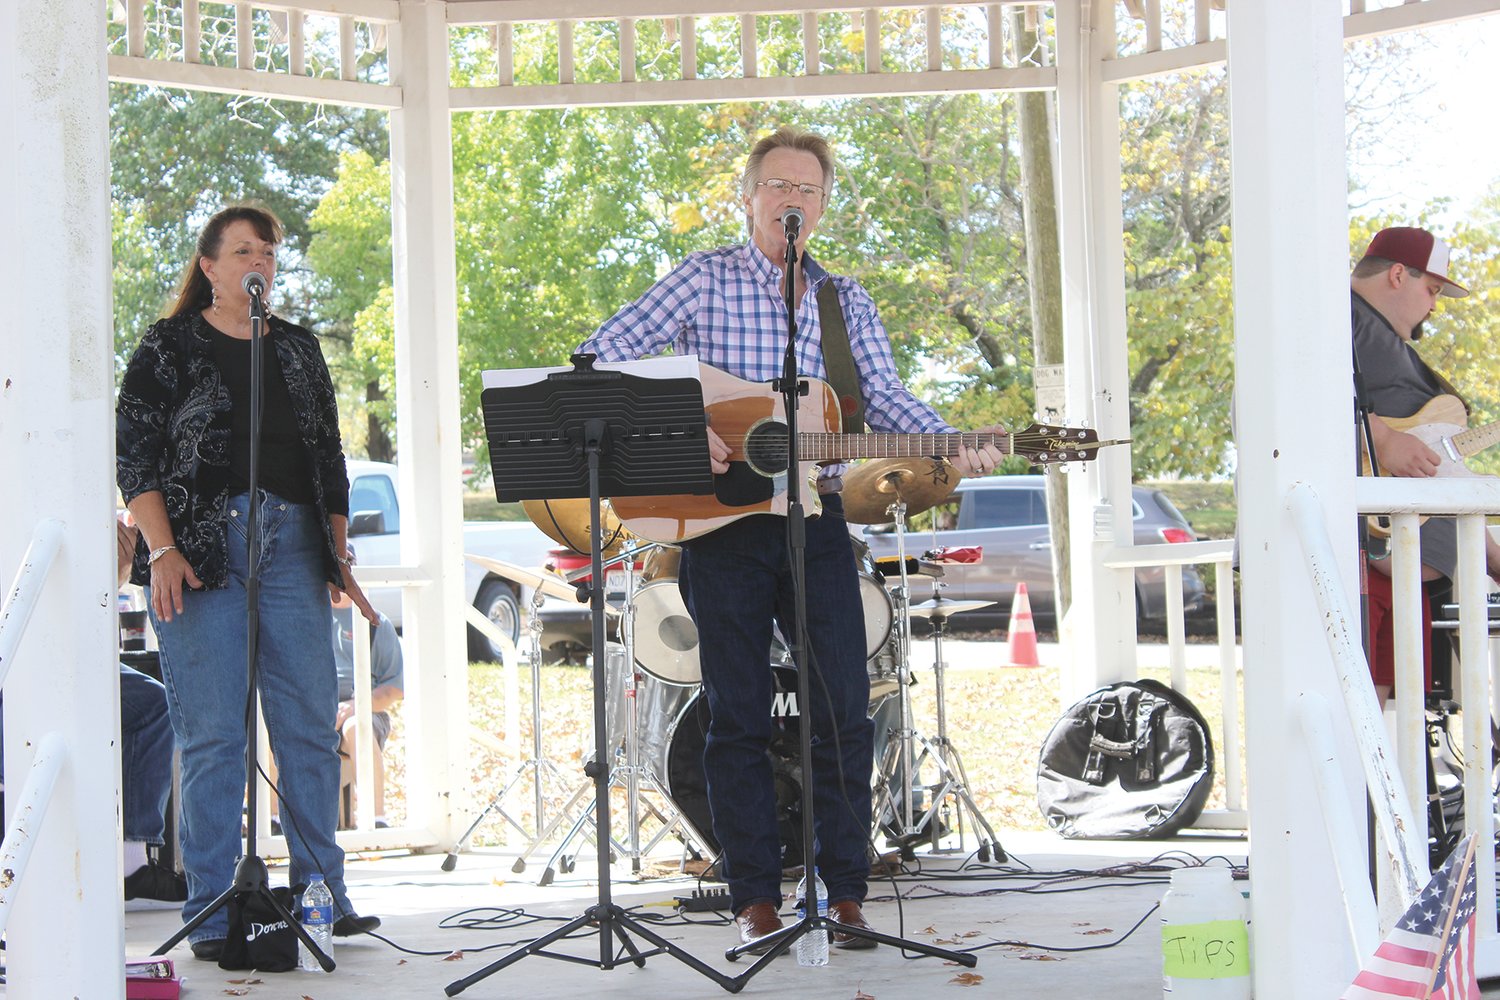 The Jam Dandy Band performs during the Car Show.